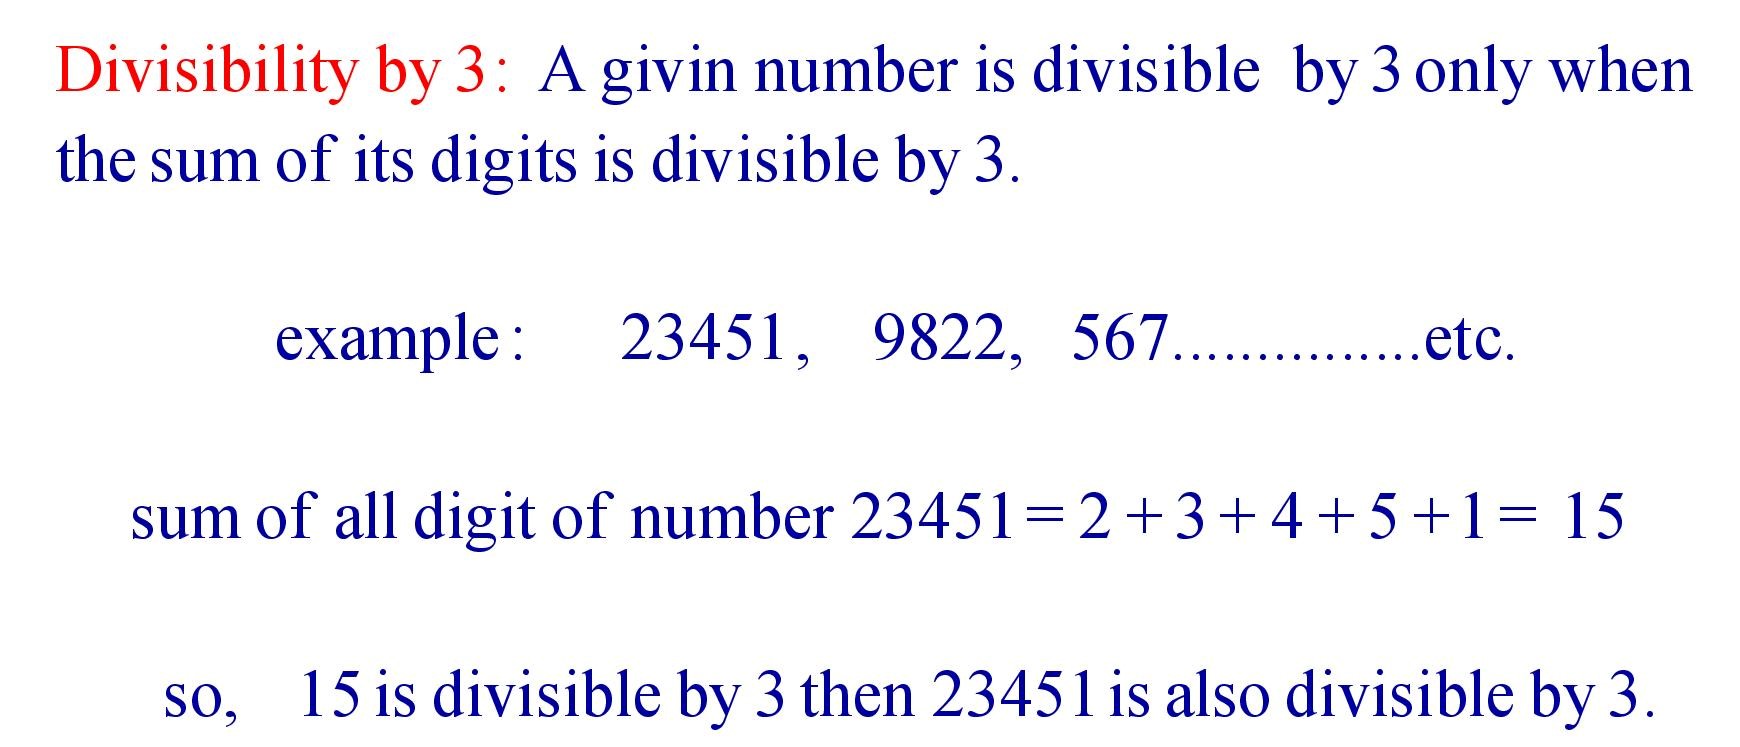 Divisibility by 3